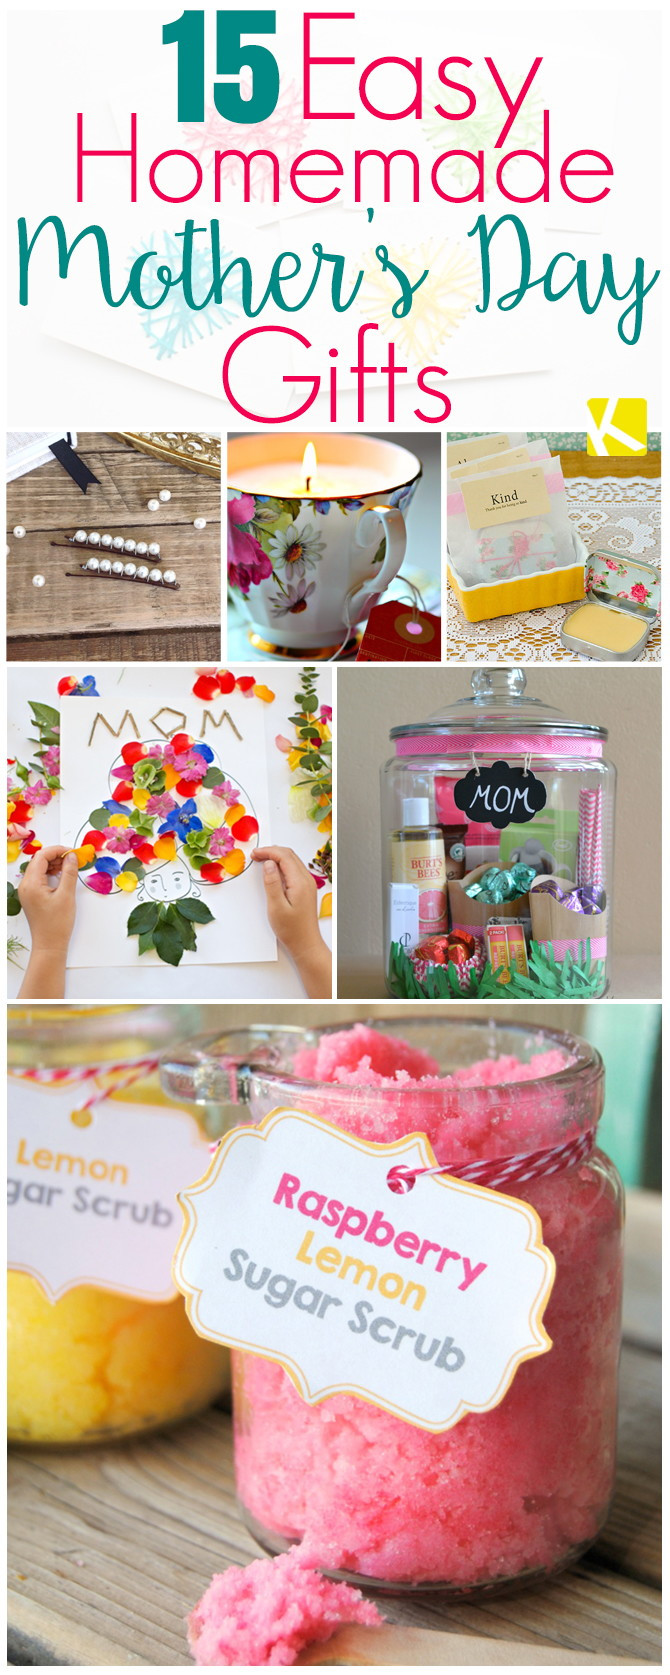 Mothers Day Gifts For Kids To Make
 15 Mother’s Day Gifts That Are Ridiculously Easy to Make